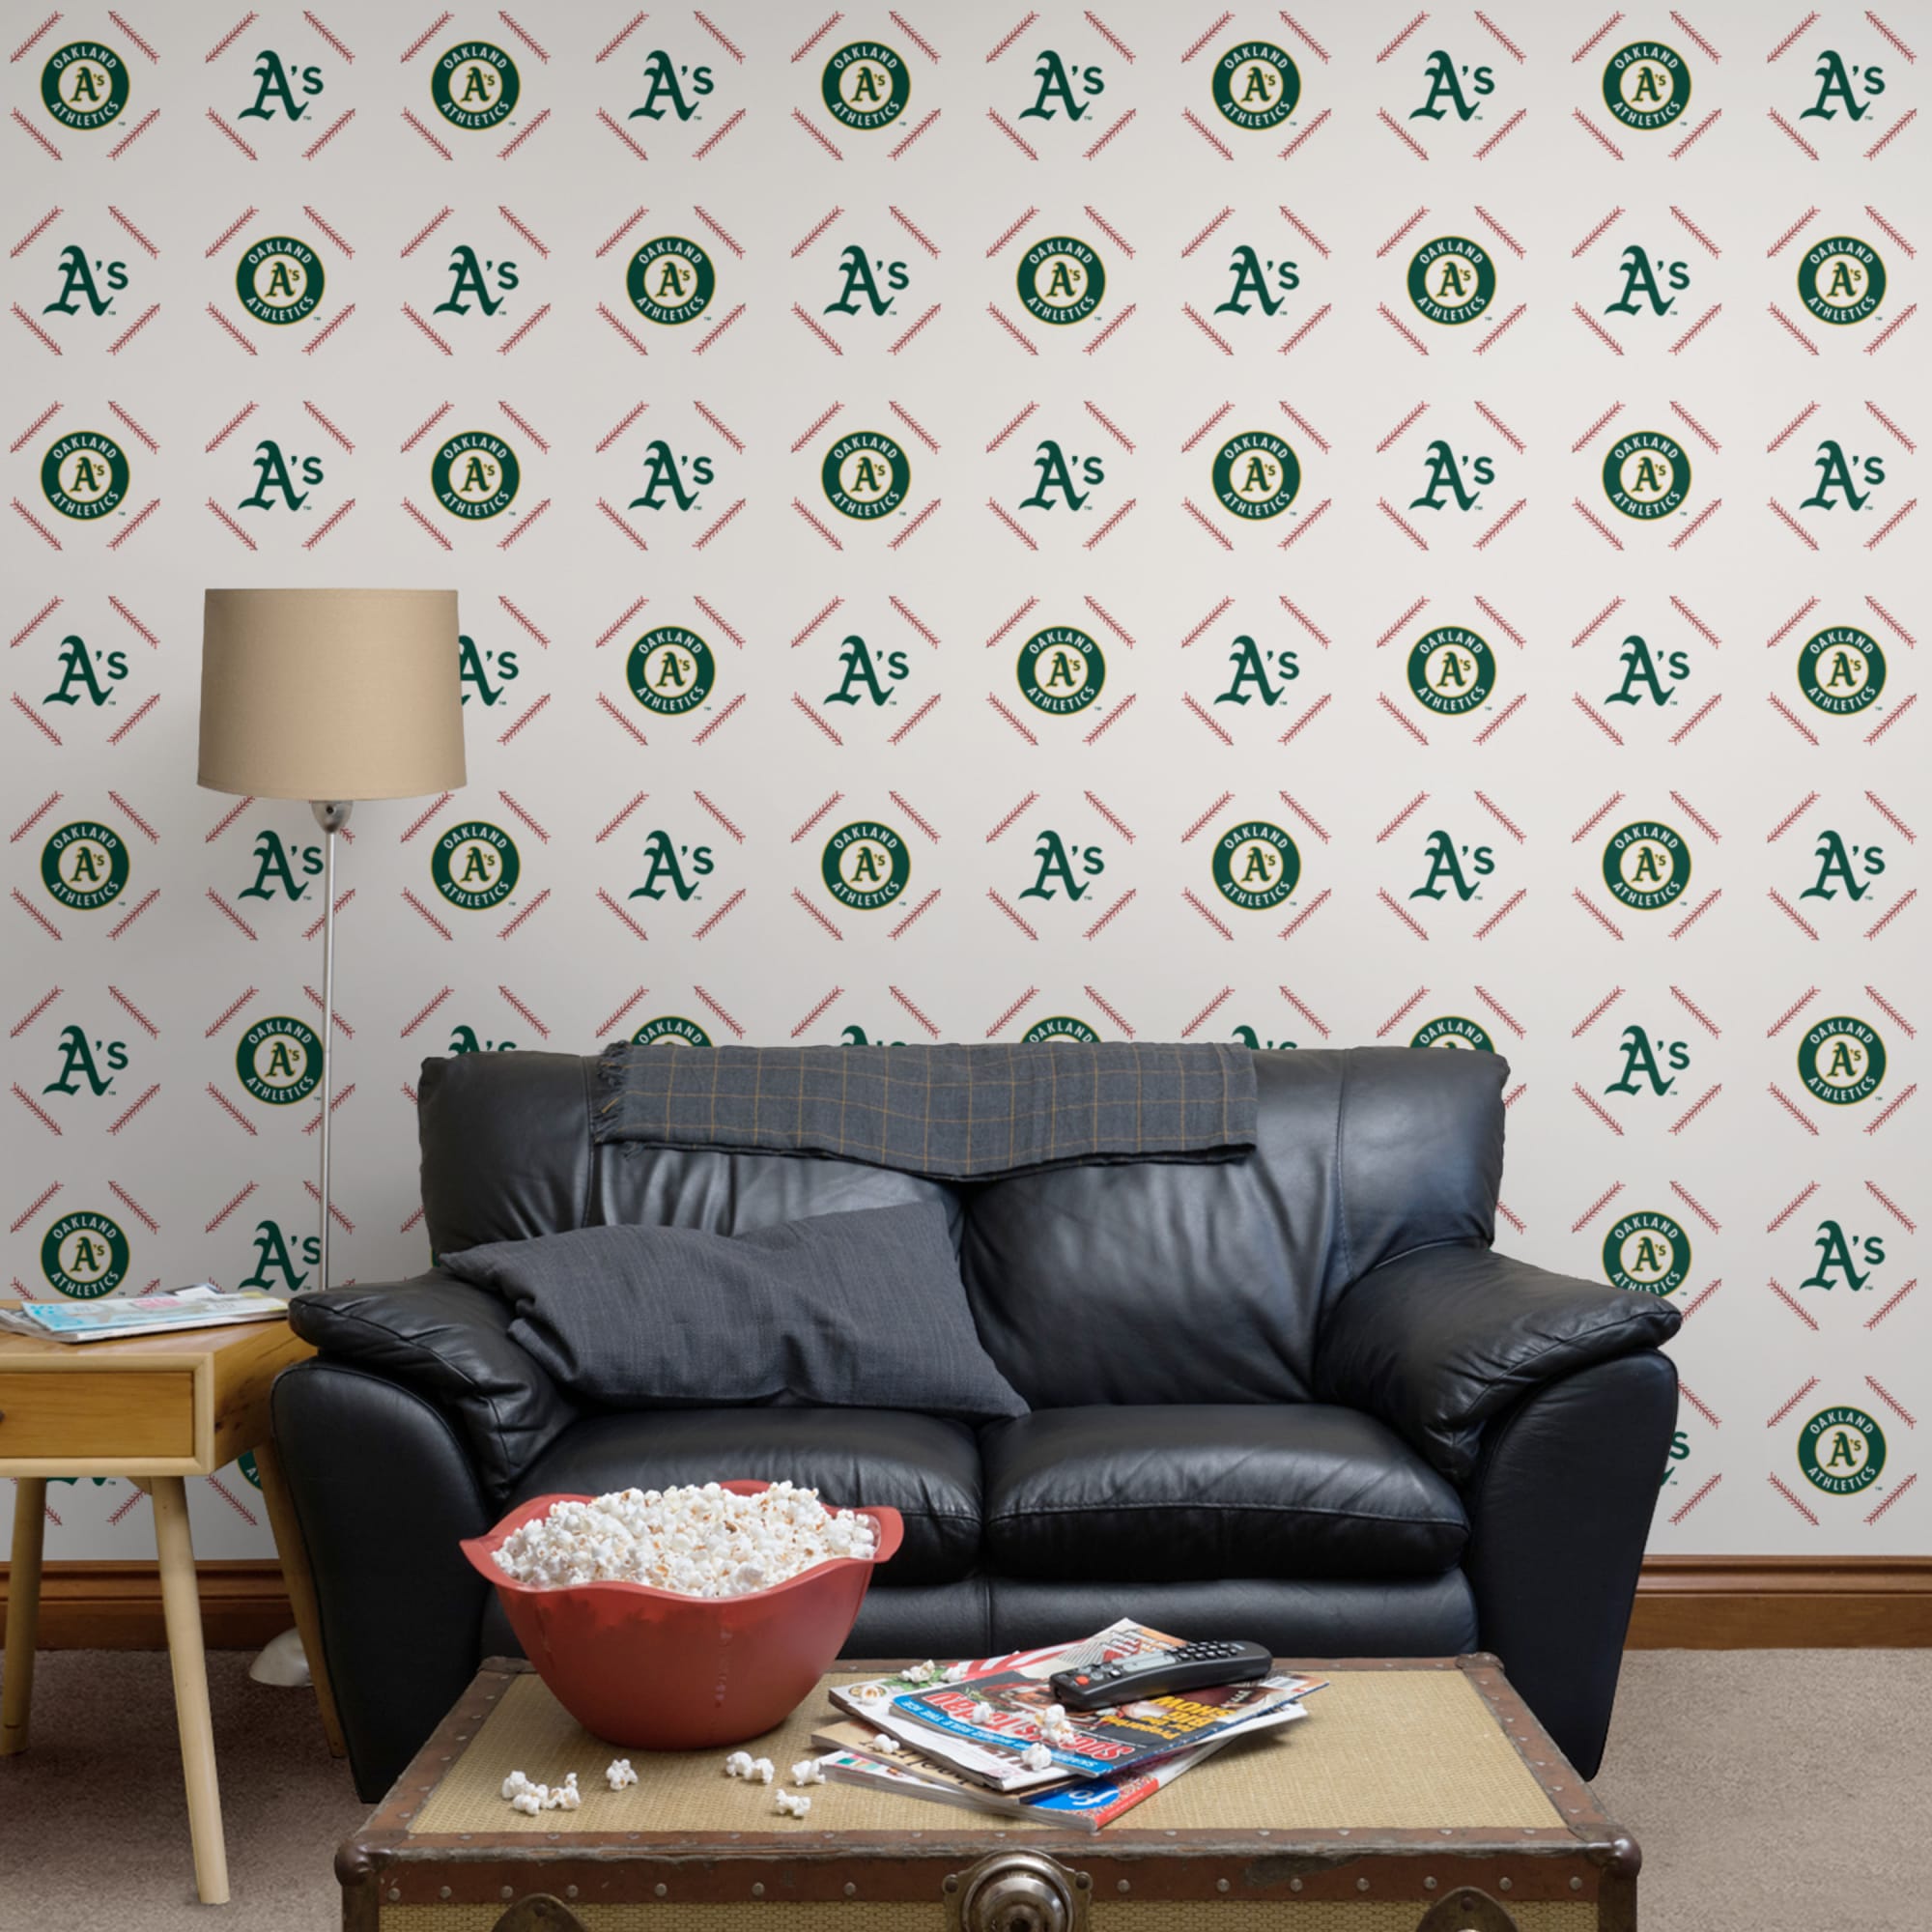 Oakland Athletics: Stitch Pattern - Officially Licensed Removable Wallpaper 12" x 12" Sample by Fathead | 100% Vinyl